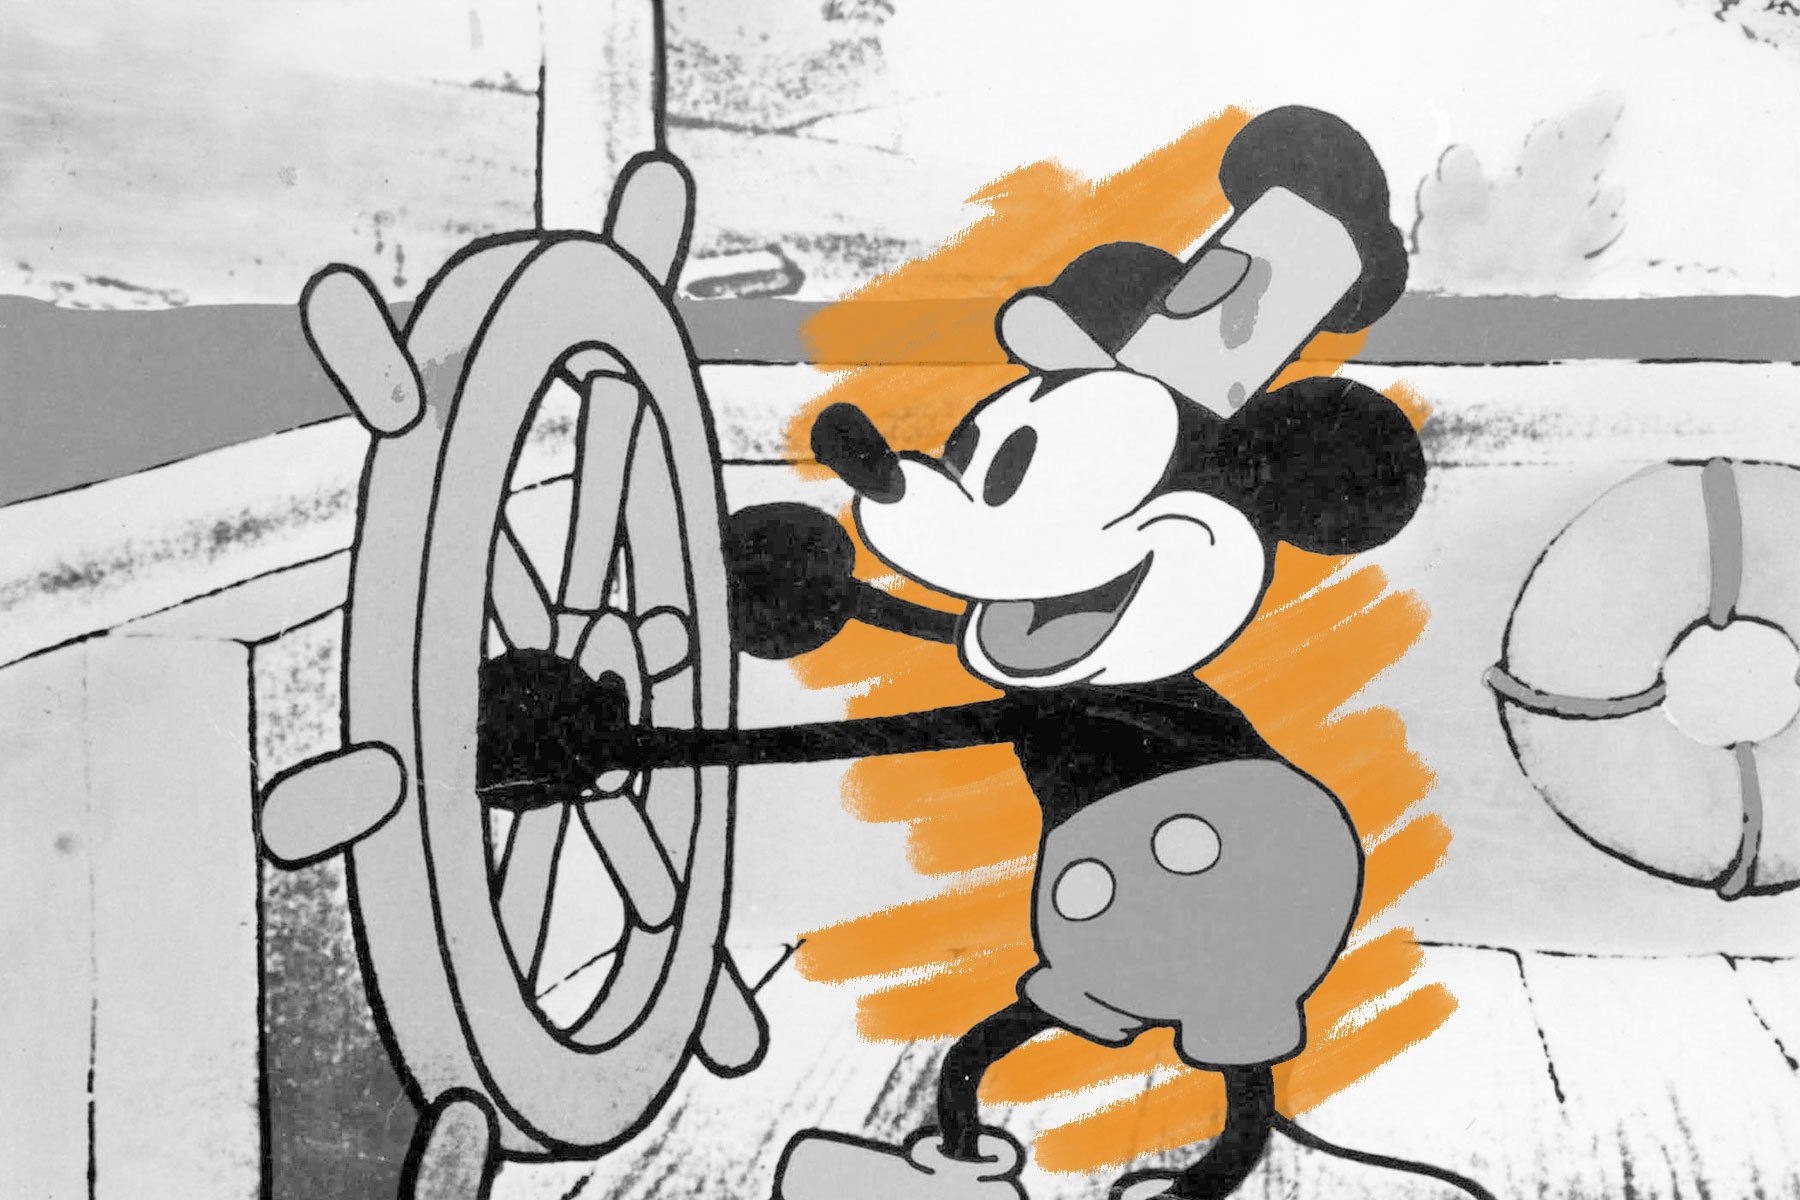 How To Draw Mickey Mouse For Kids, Easy Tutorial, 7 Steps - Toons Mag